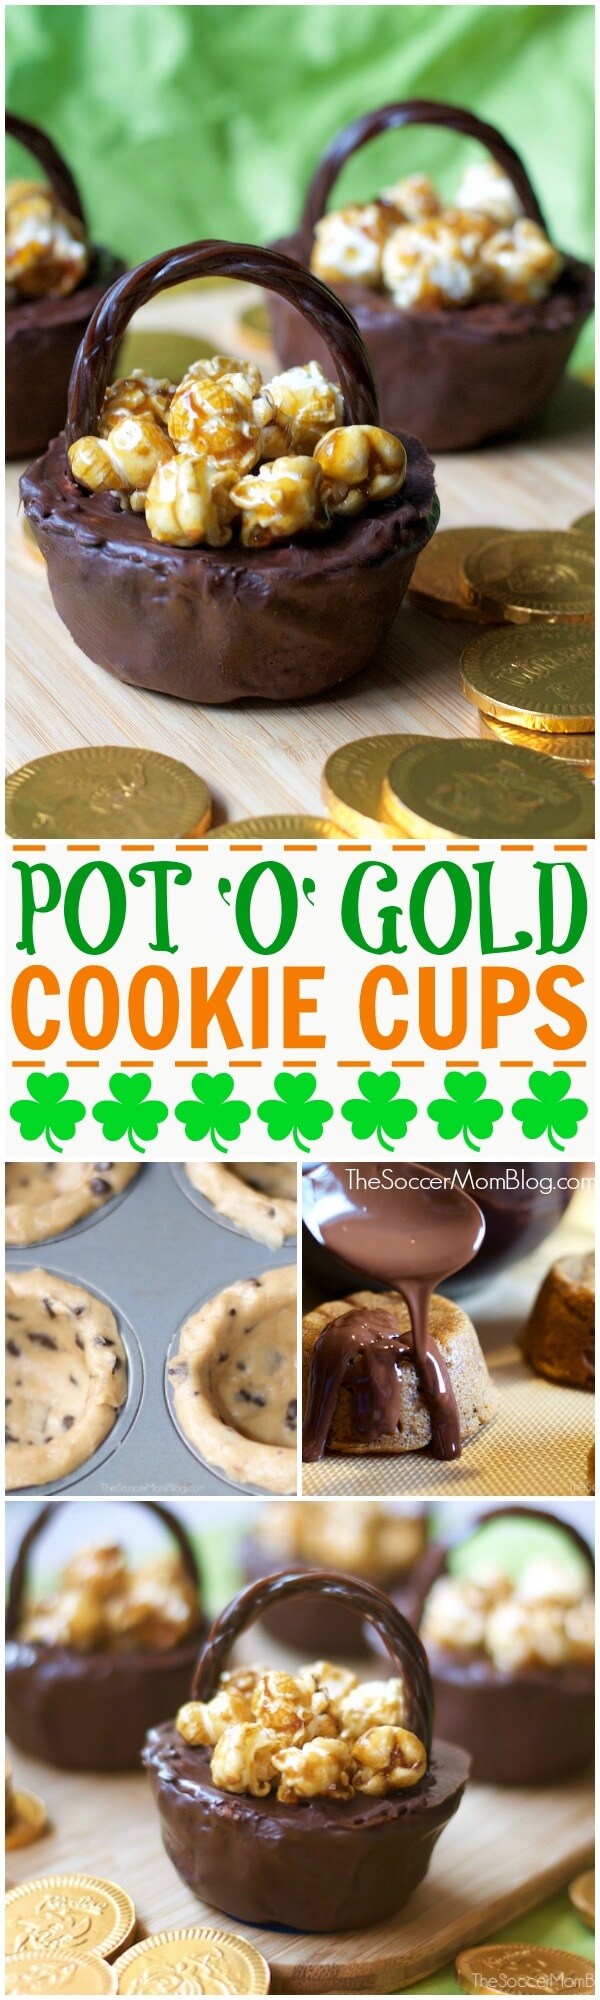 Fun & easy to make (only 4 ingredients!) St. Patrick's Day Cookie Cups look like a pot of gold! (Or chocolate!) A perfect holiday dessert to make with kids!